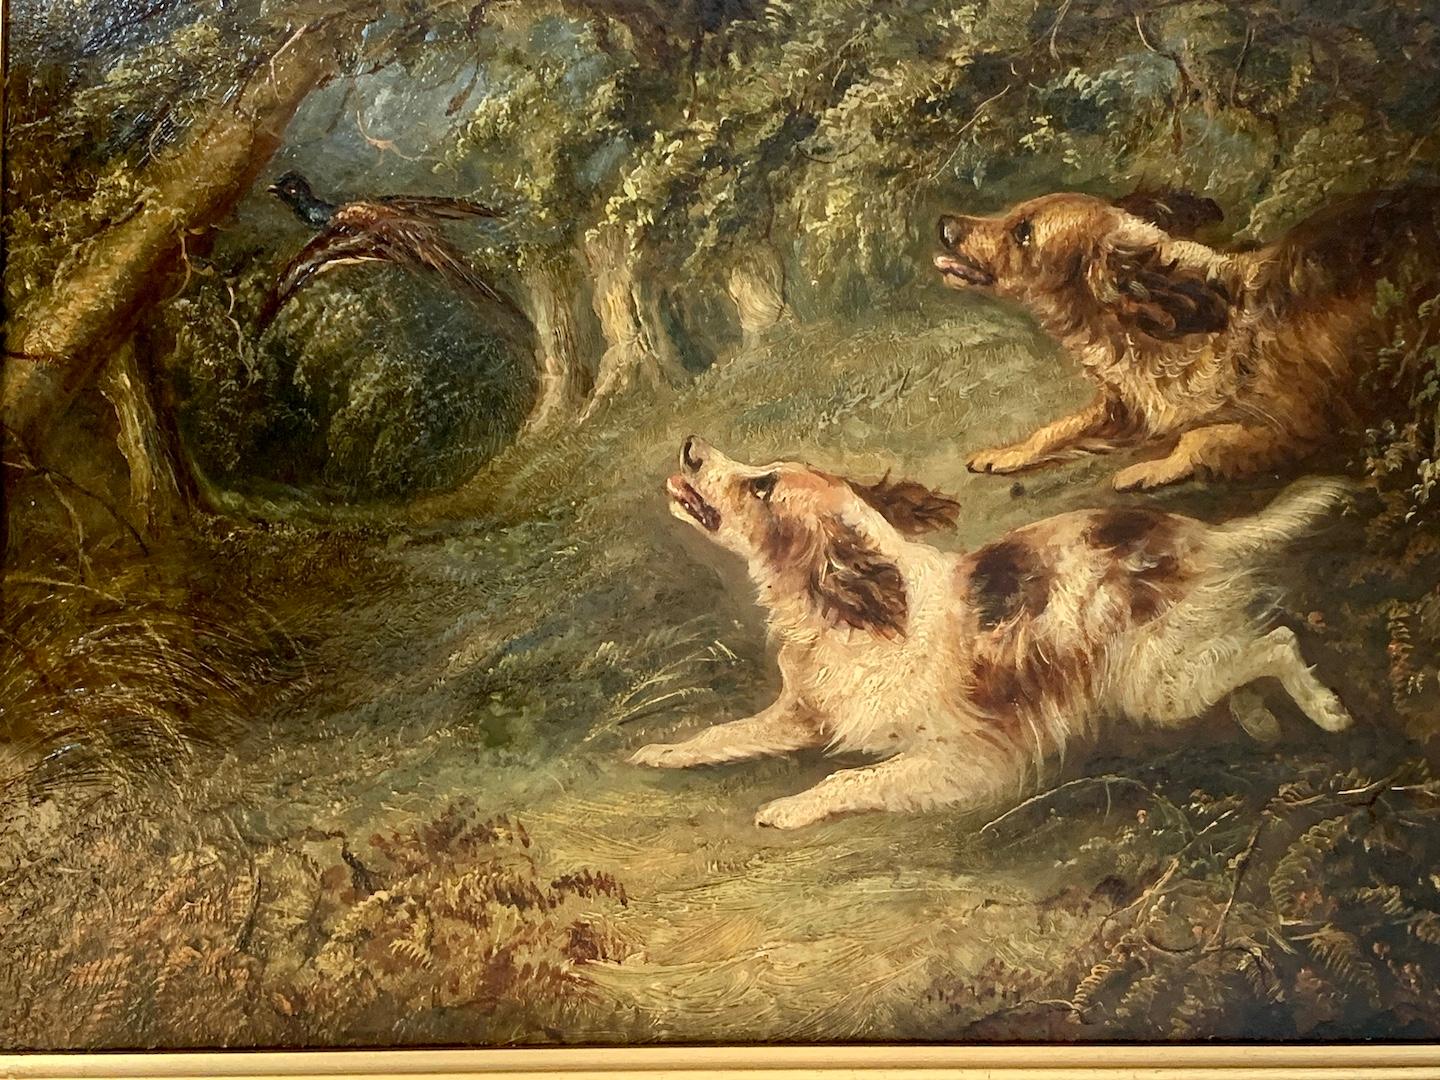 19th century English , two spaniel dogs chasing a Pheasant in a landscape - Painting by George Armfield